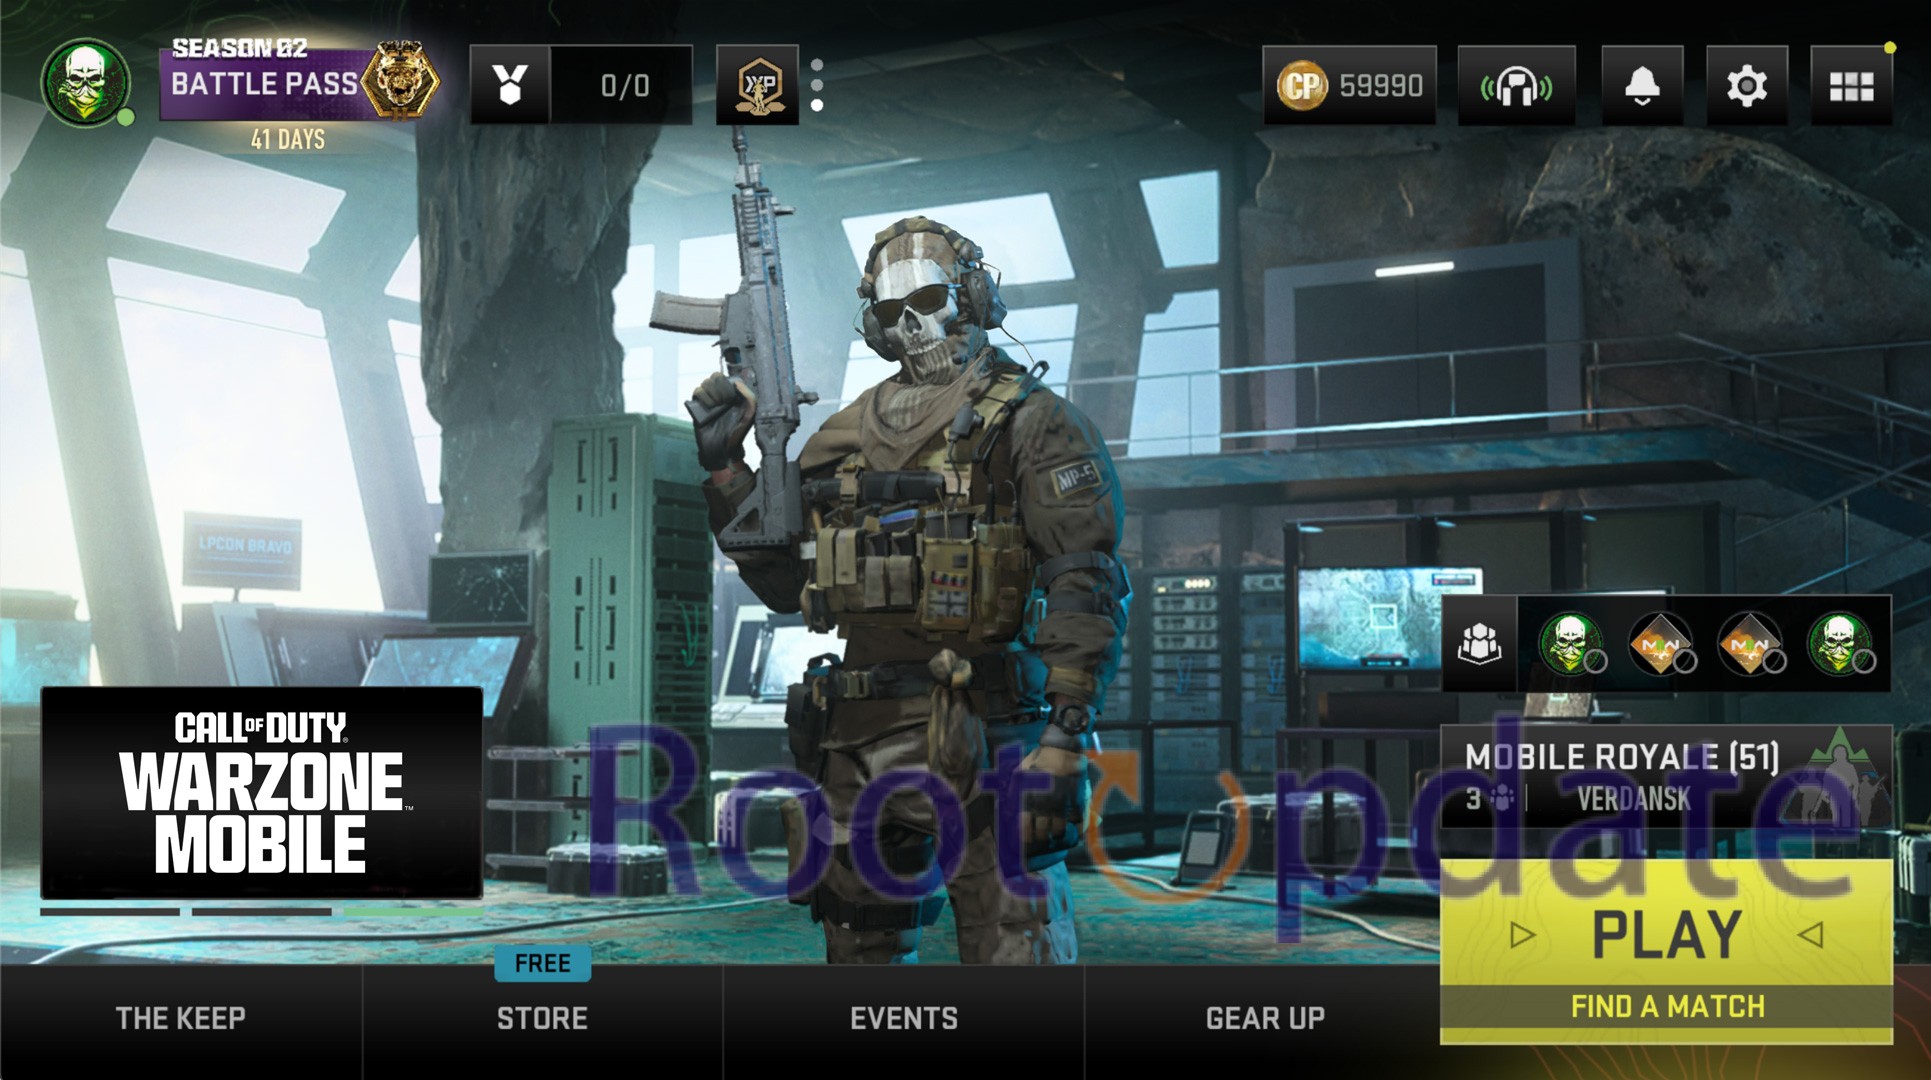 How to Link Activision Account to Warzone Mobile on Android and iOS